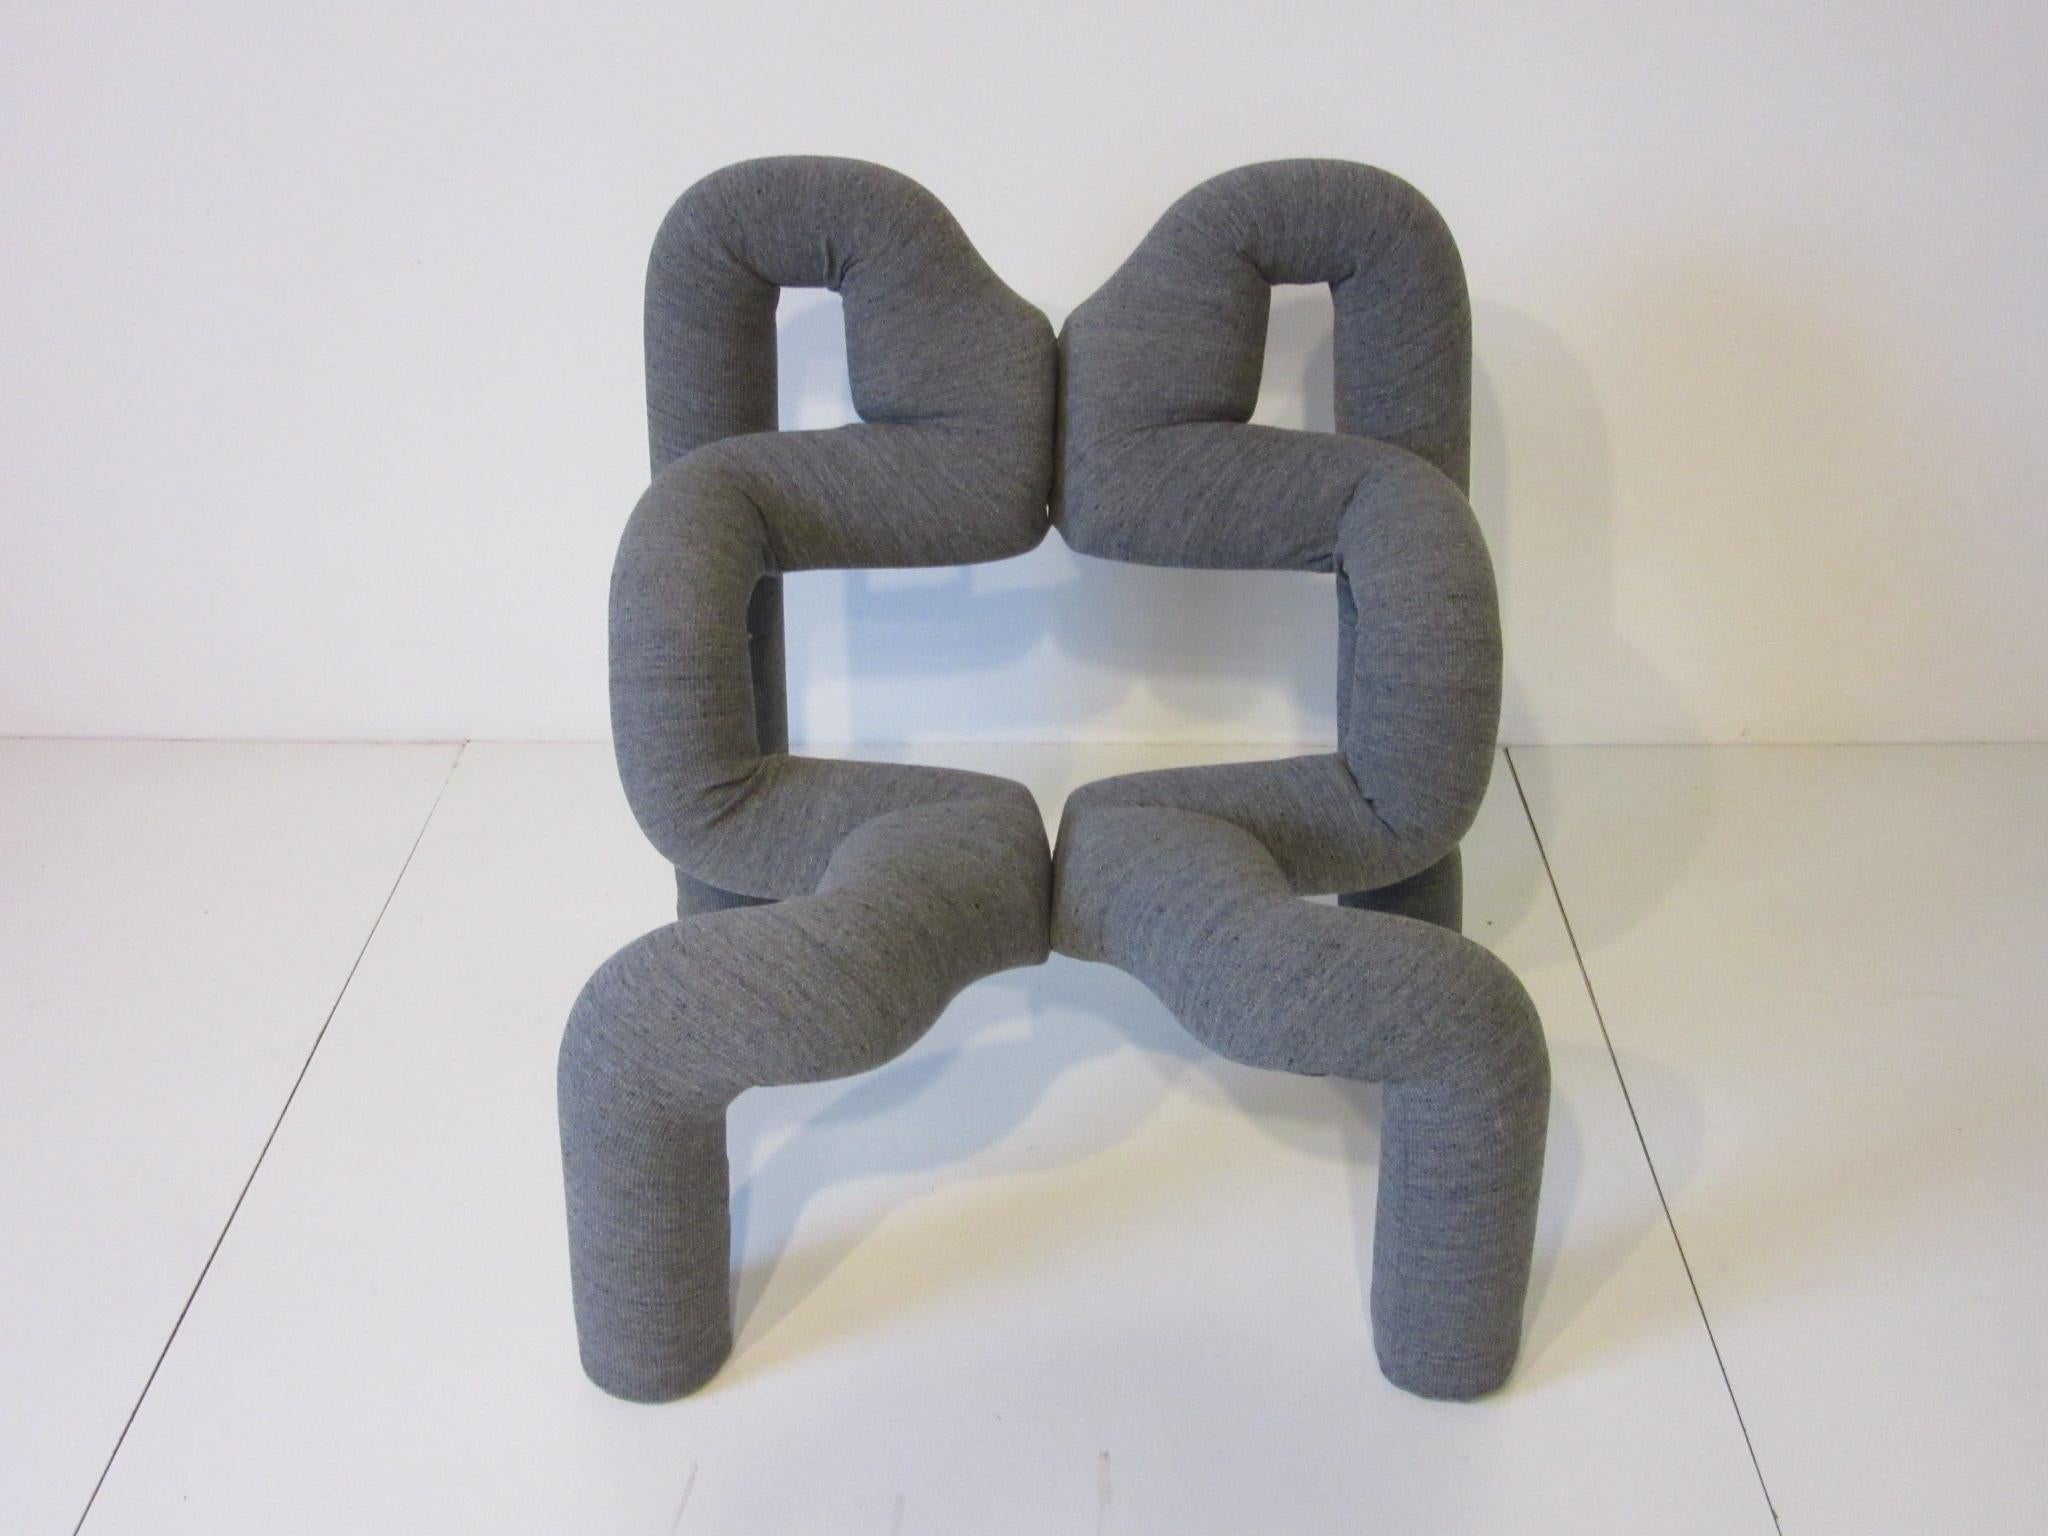 A vintage tubular foam covered with knit flannel sculptural chair designed by Terje Ekstrom called the Ekstrem chair. This chair is amazingly comfortable and a piece of art , made in Norway by Hjellegicrde Mobler.